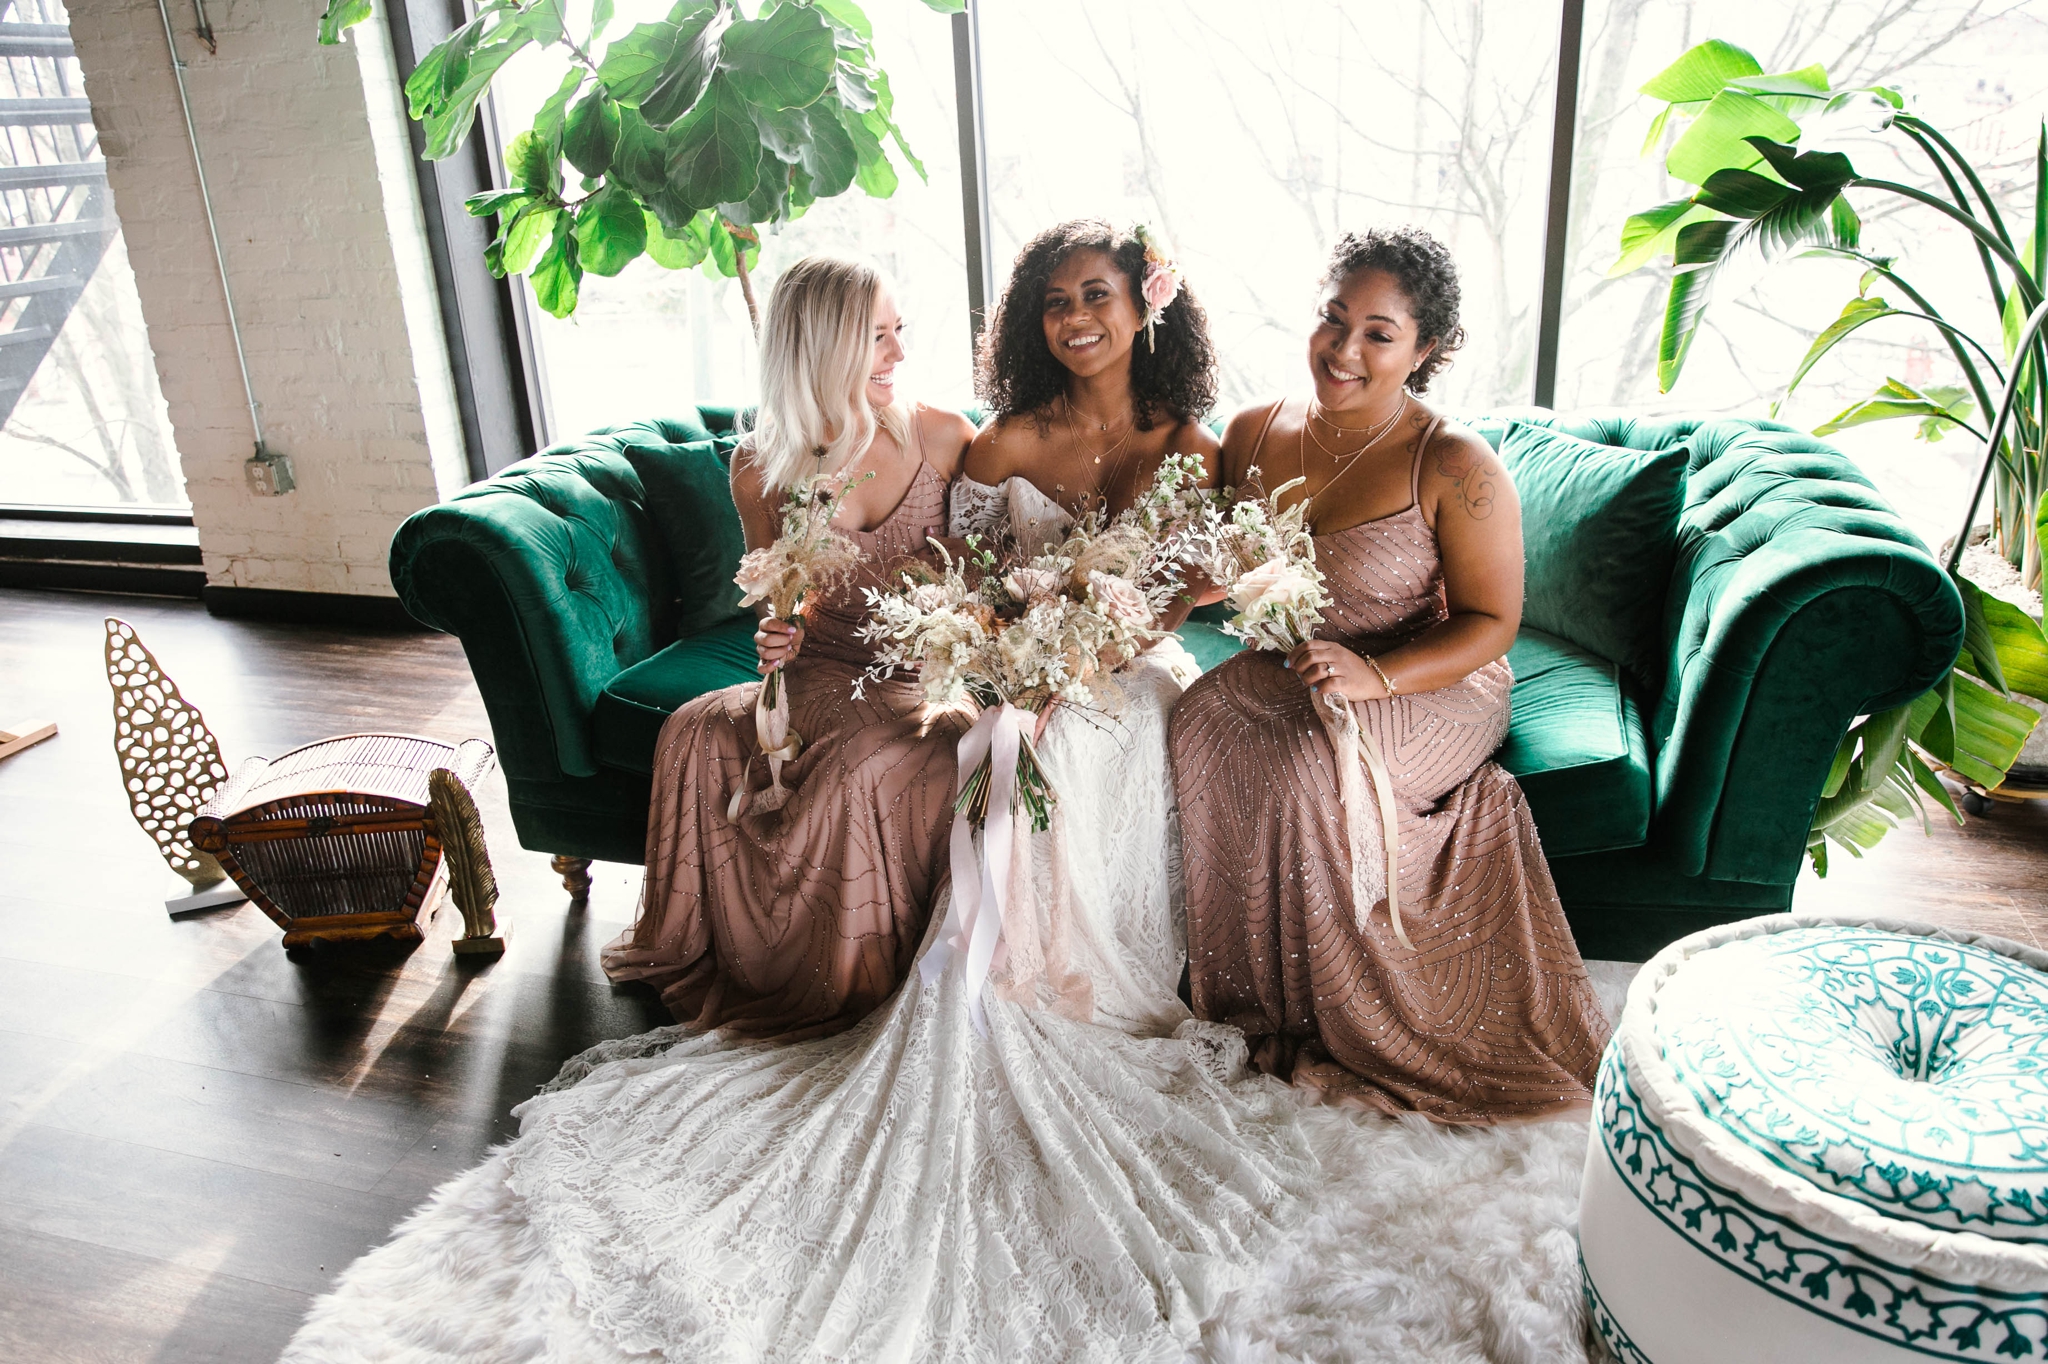  Indoor Natural light portrait of a black bride and her bridesmaids in a boho wedding dress with light pink bridesmaids dresses sitting on an emerald tufted sofa - flowers in natural african american hair - oahu hawaii wedding photographer 